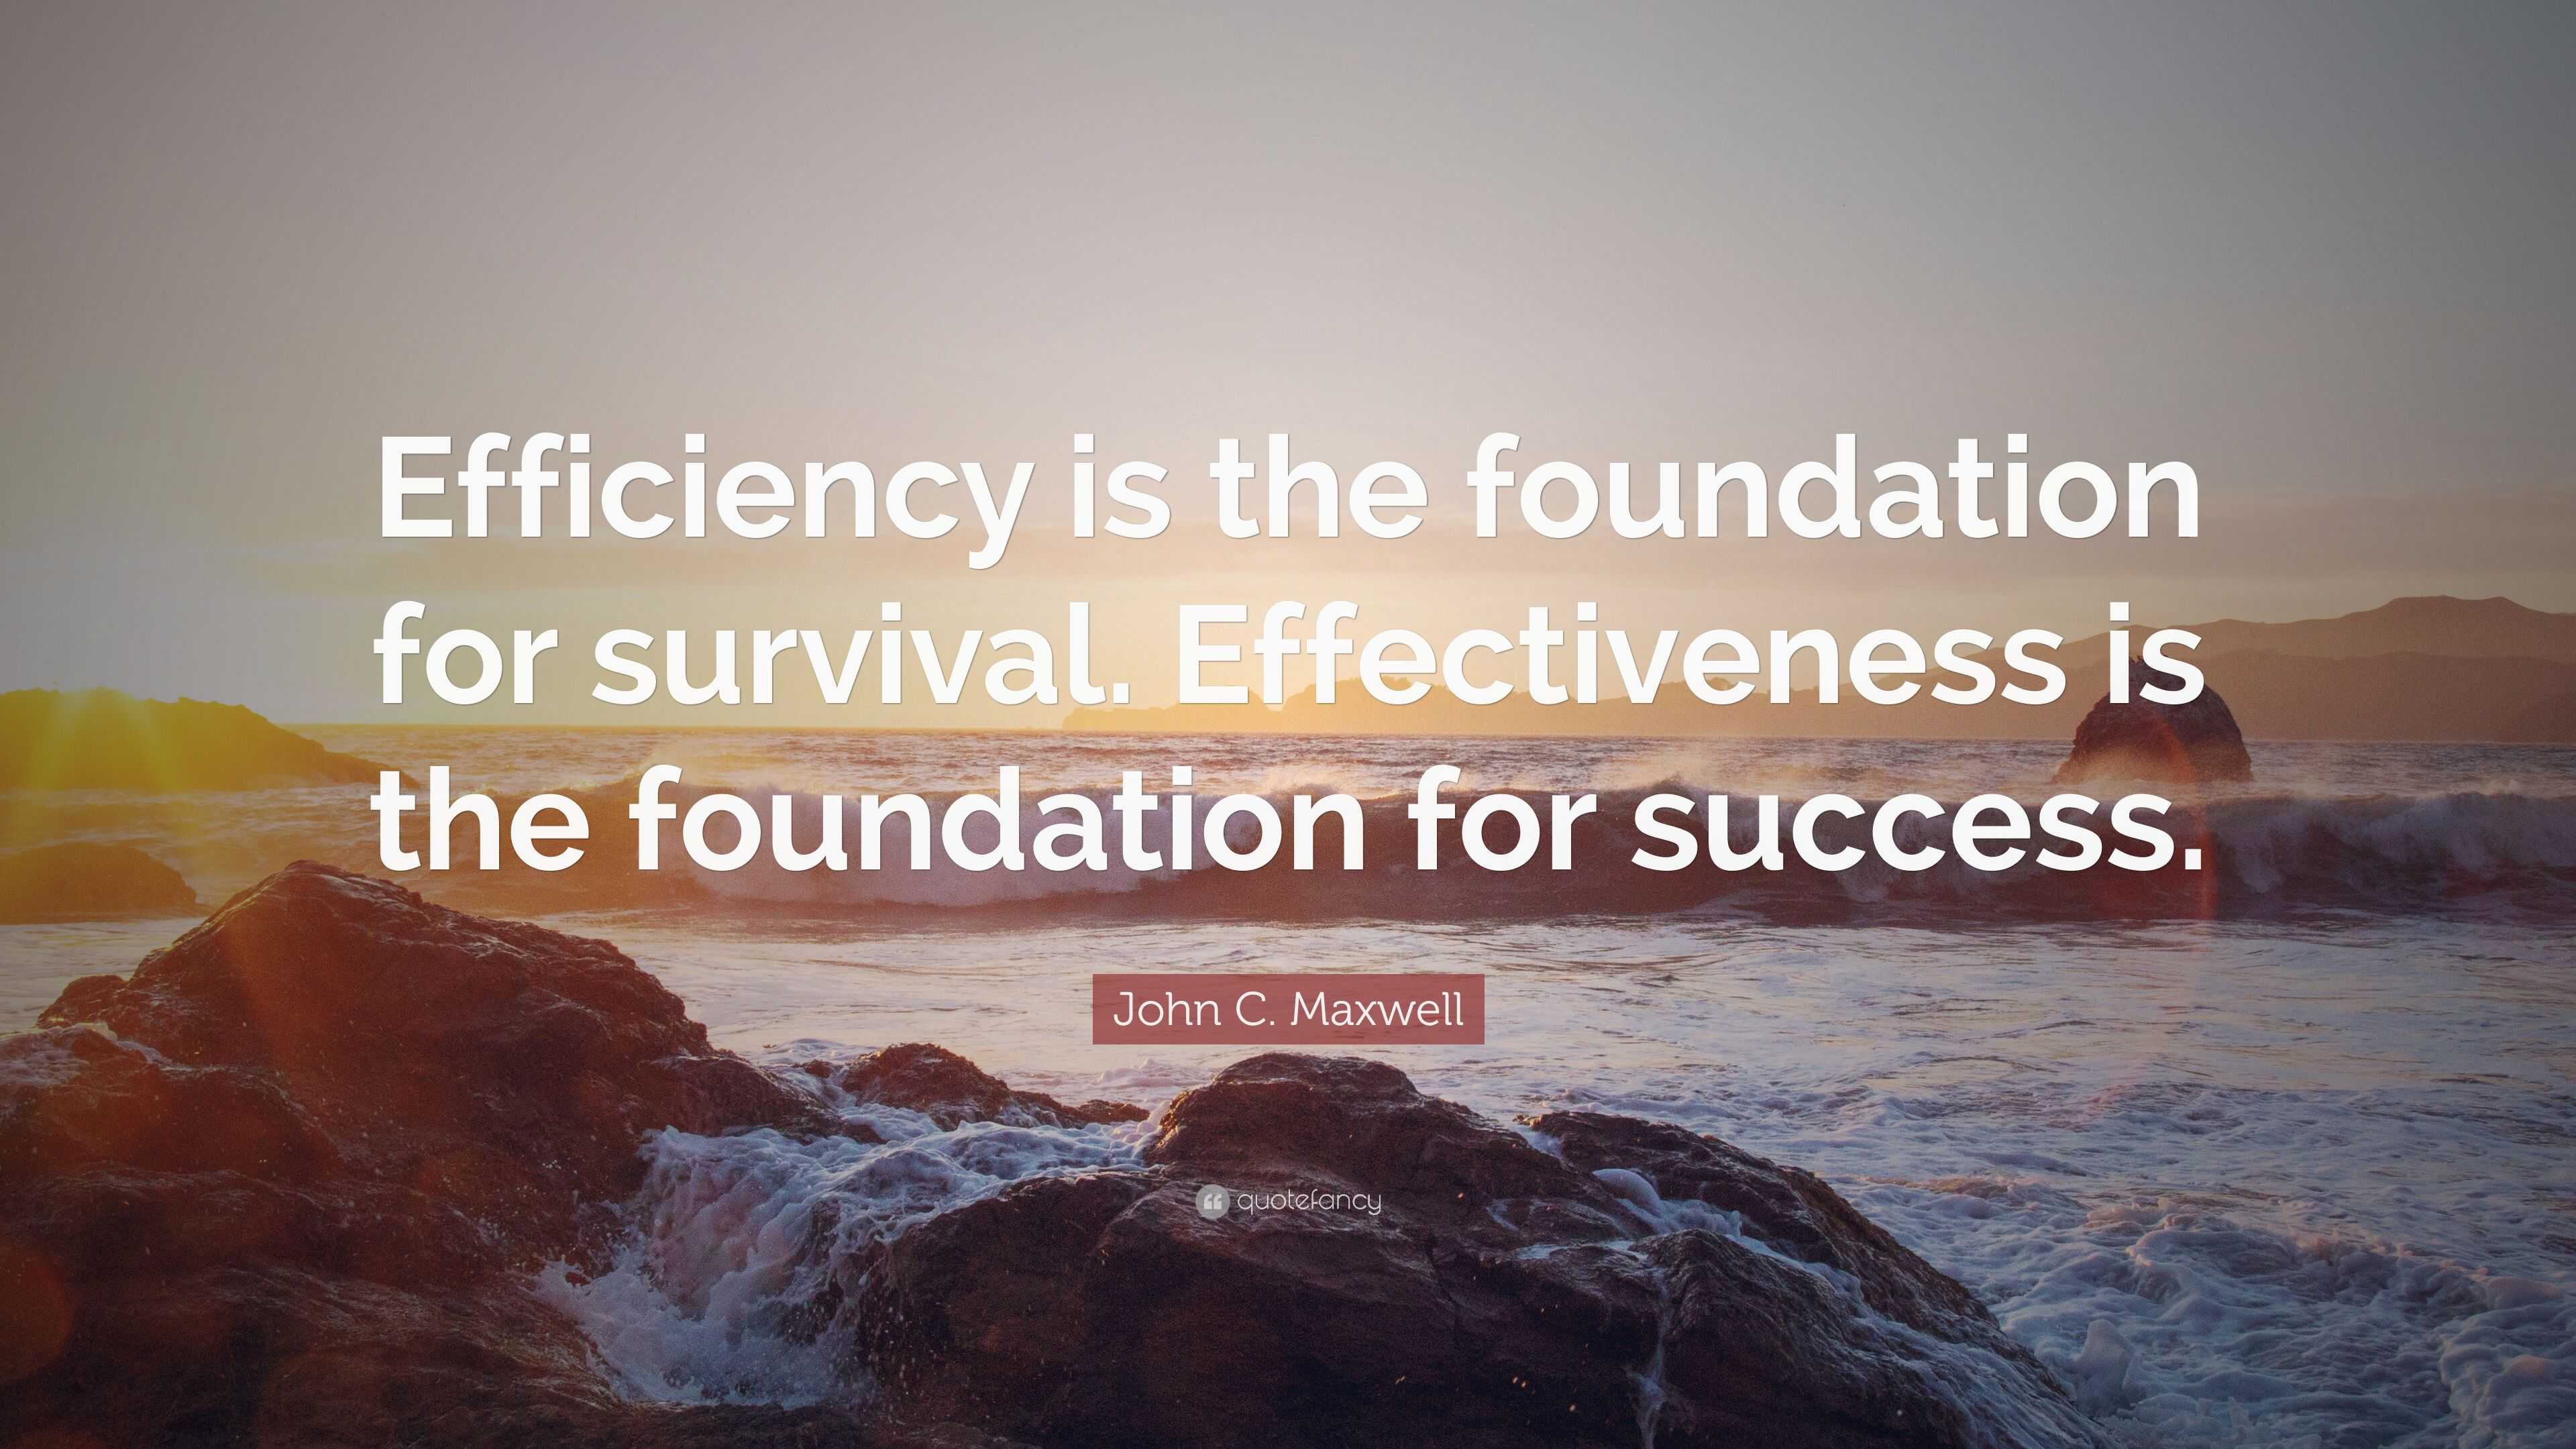 John C. Maxwell Quote: “Efficiency is the foundation for survival